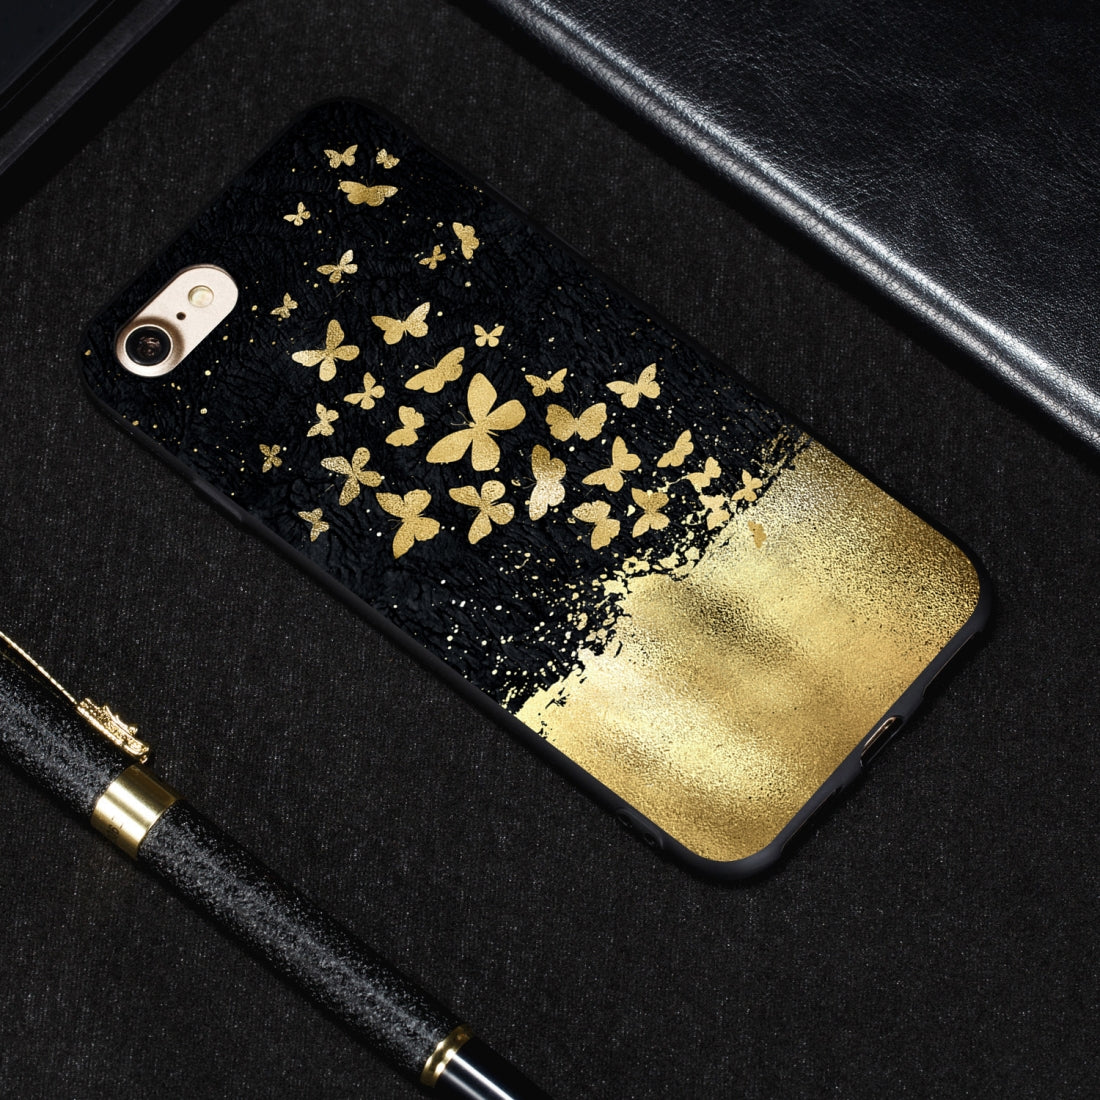 Gold Butterfly Painted Pattern Soft TPU Case for iPhone 8 & 7